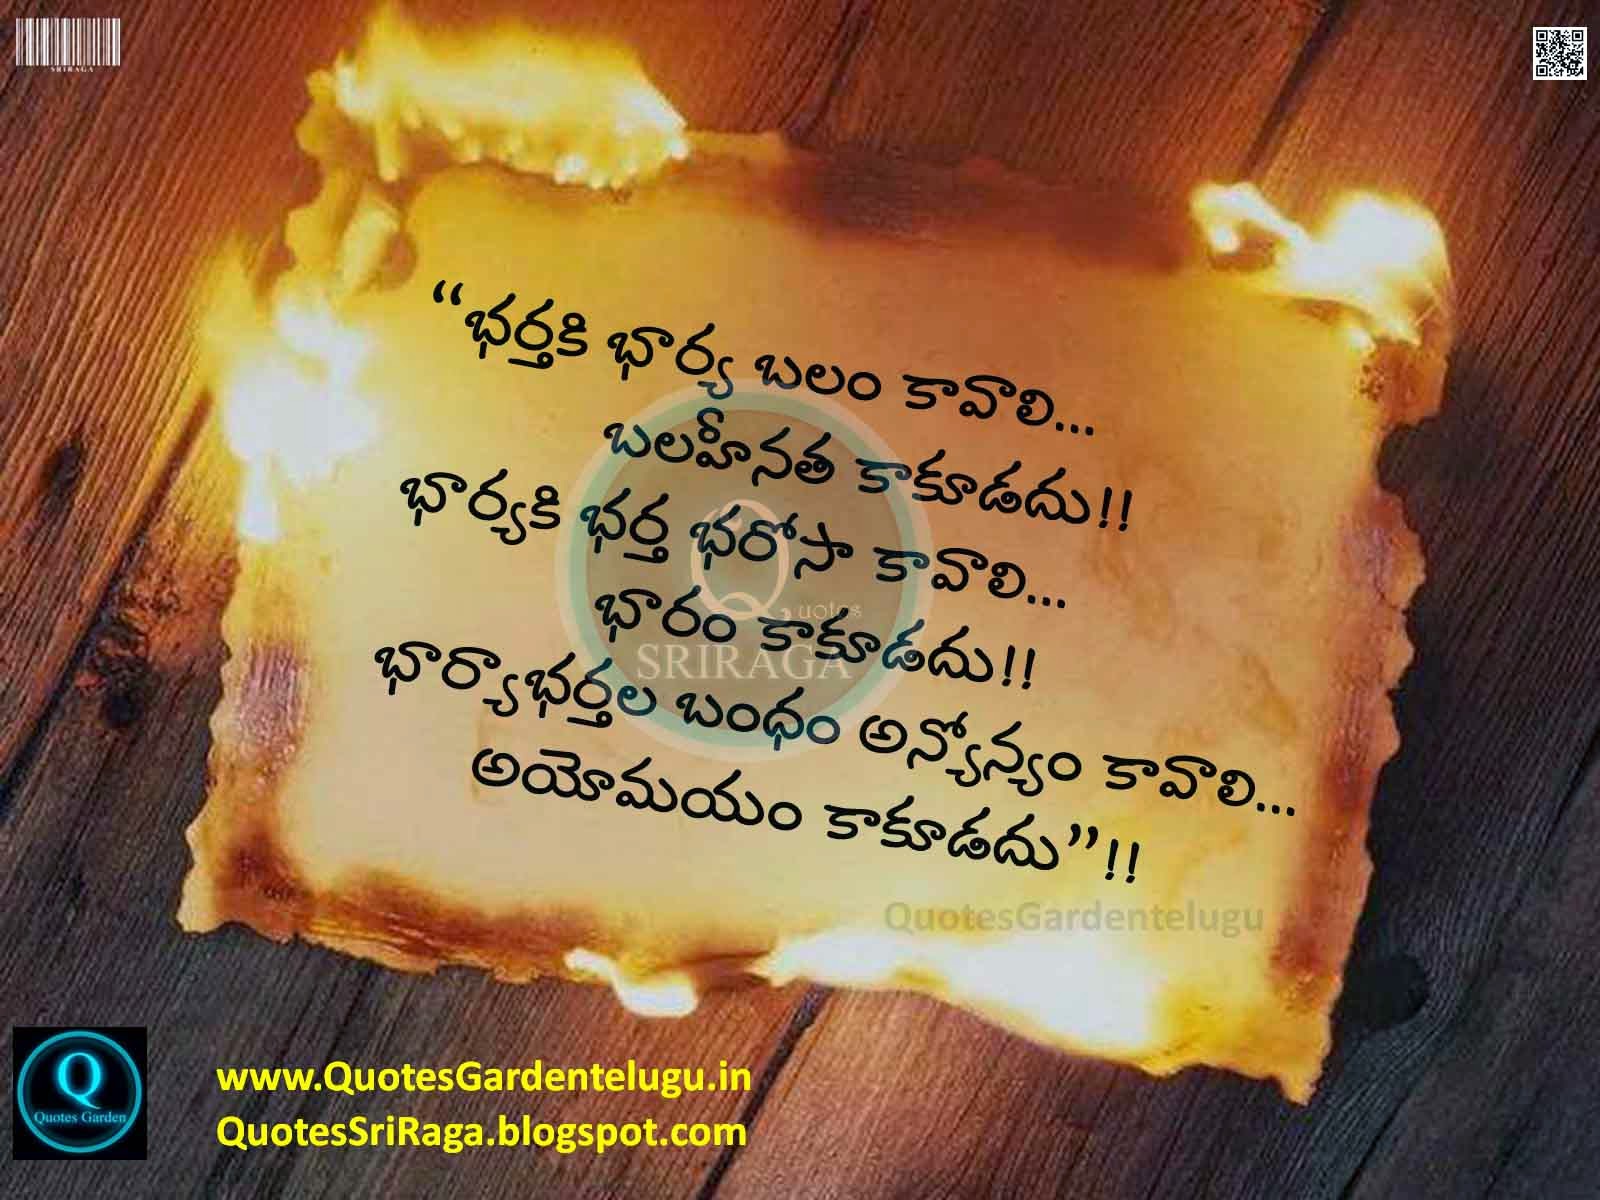 Image Result For Quotations Telugu And